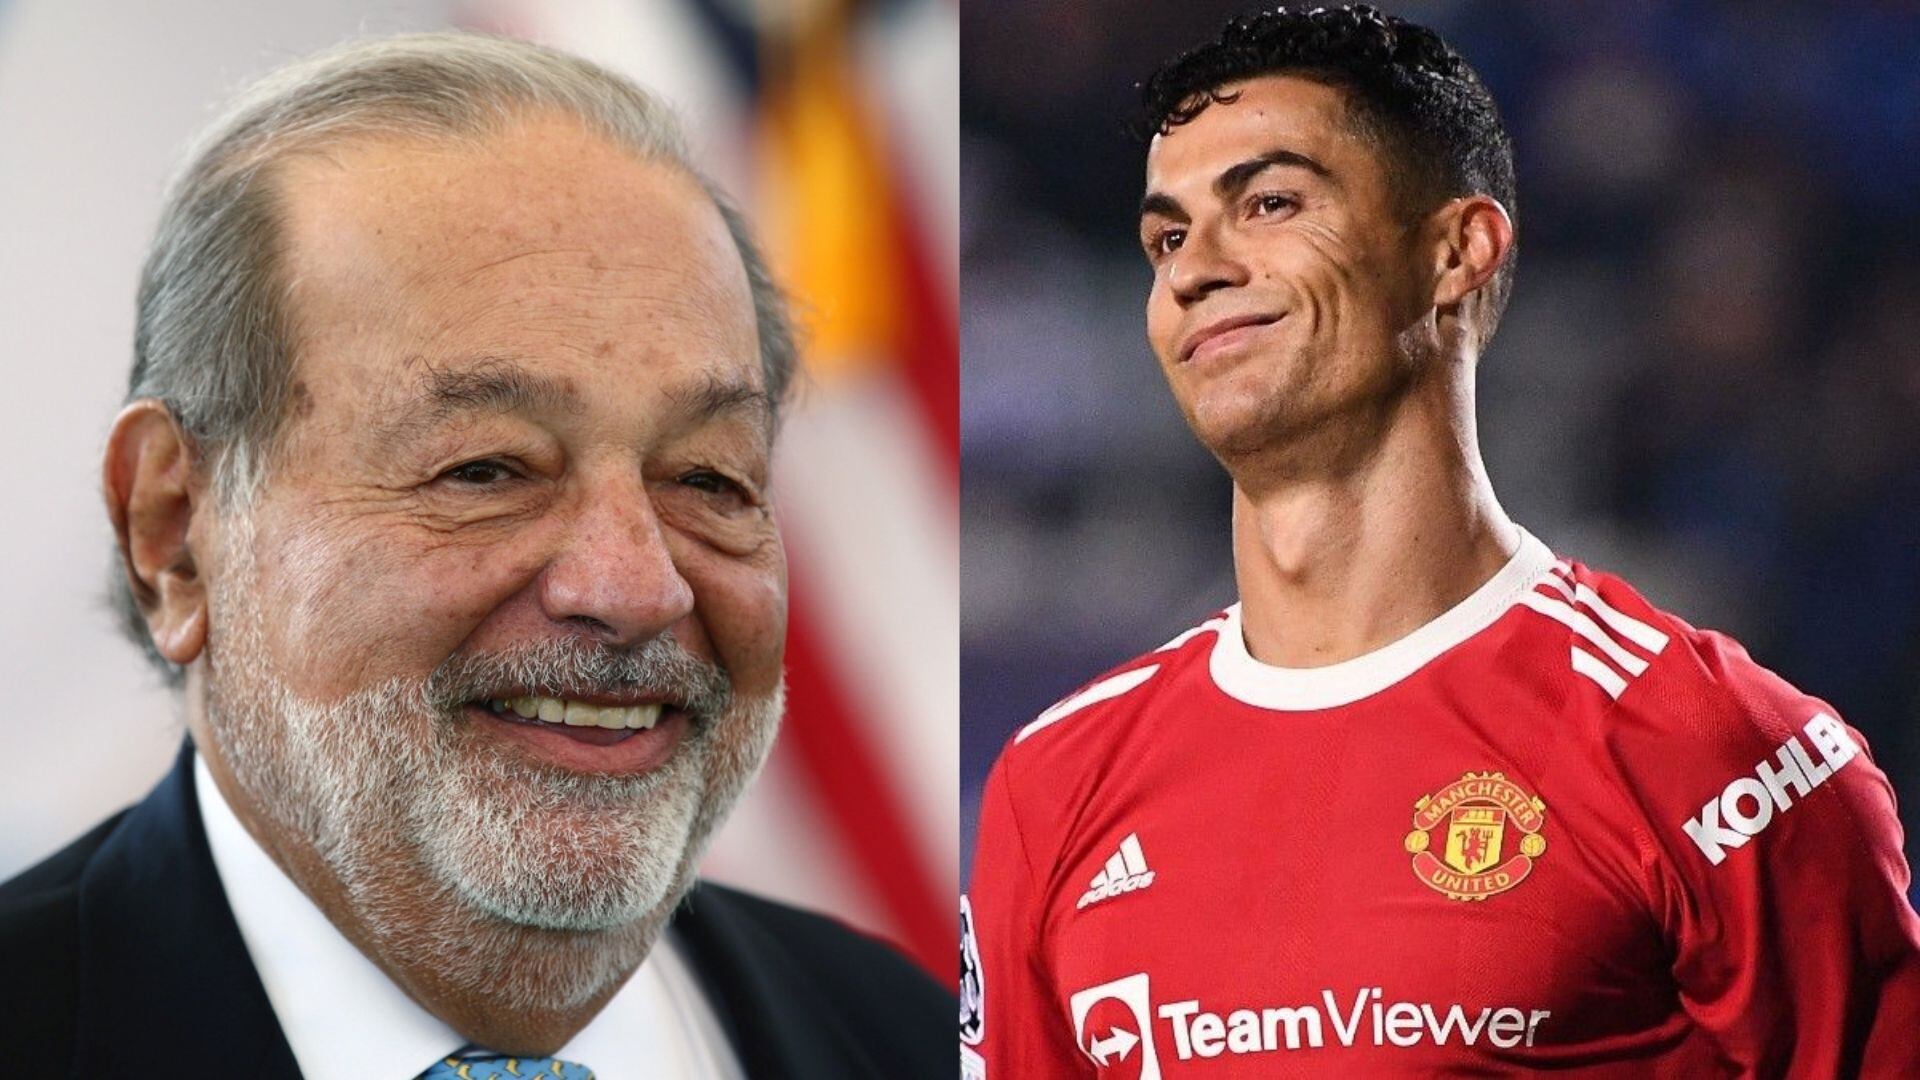 Can Cristiano Ronaldo and Carlos Slim become partners and buy this soccer club?